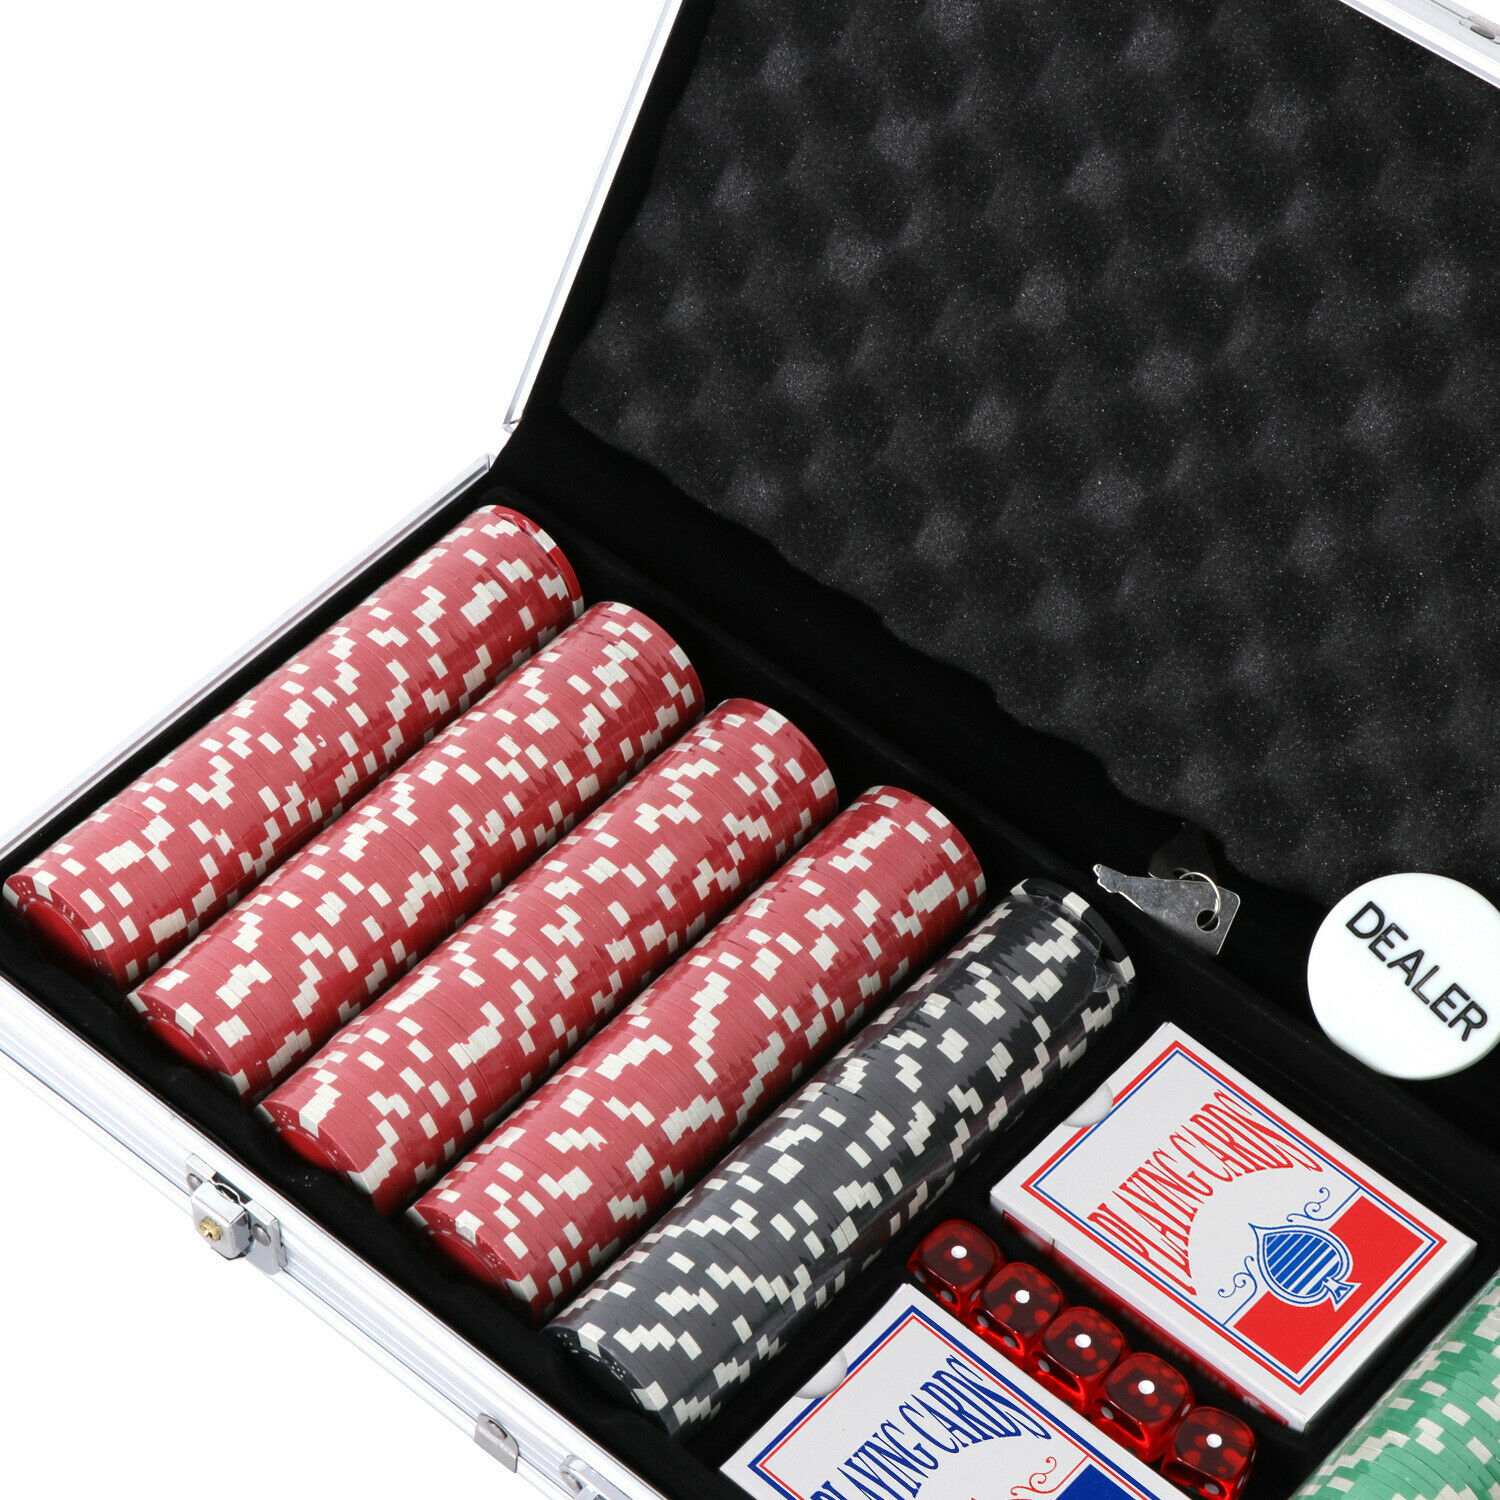 ZENY 500 Poker Chip Set 11.5 Gram Dice Style Aluminum Case, Cards, Dices, Blind Button - image 2 of 6